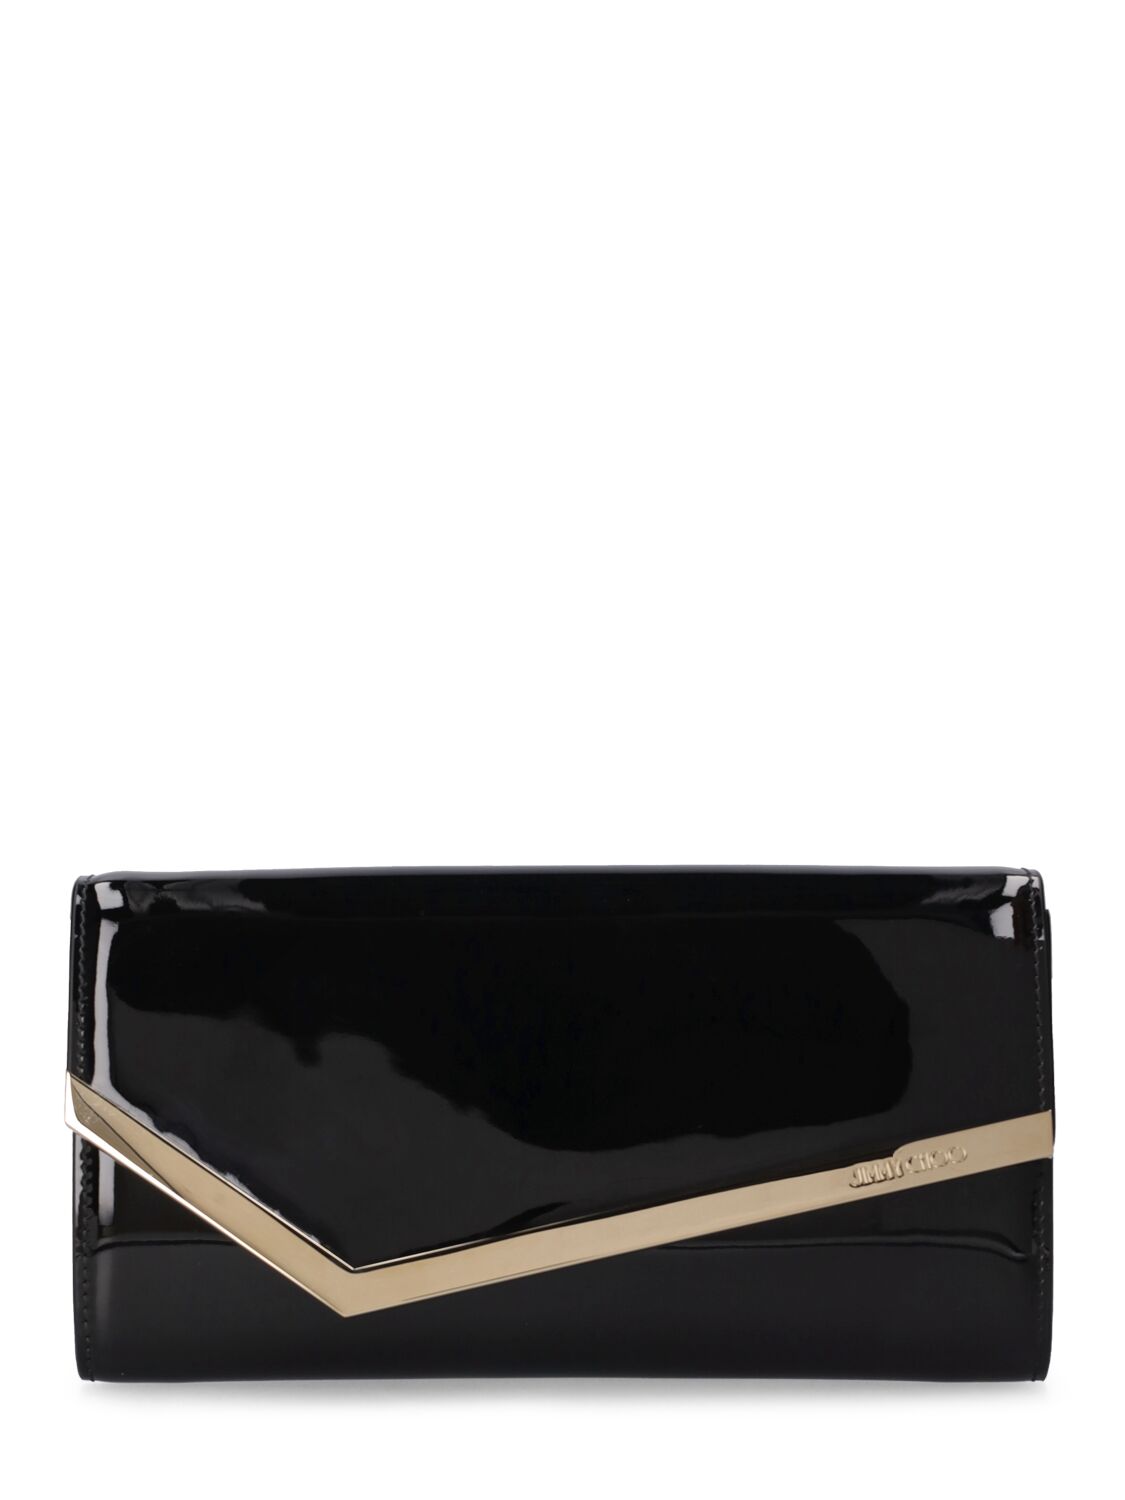 Jimmy Choo Emmie Patent Leather Clutch In Black,gold